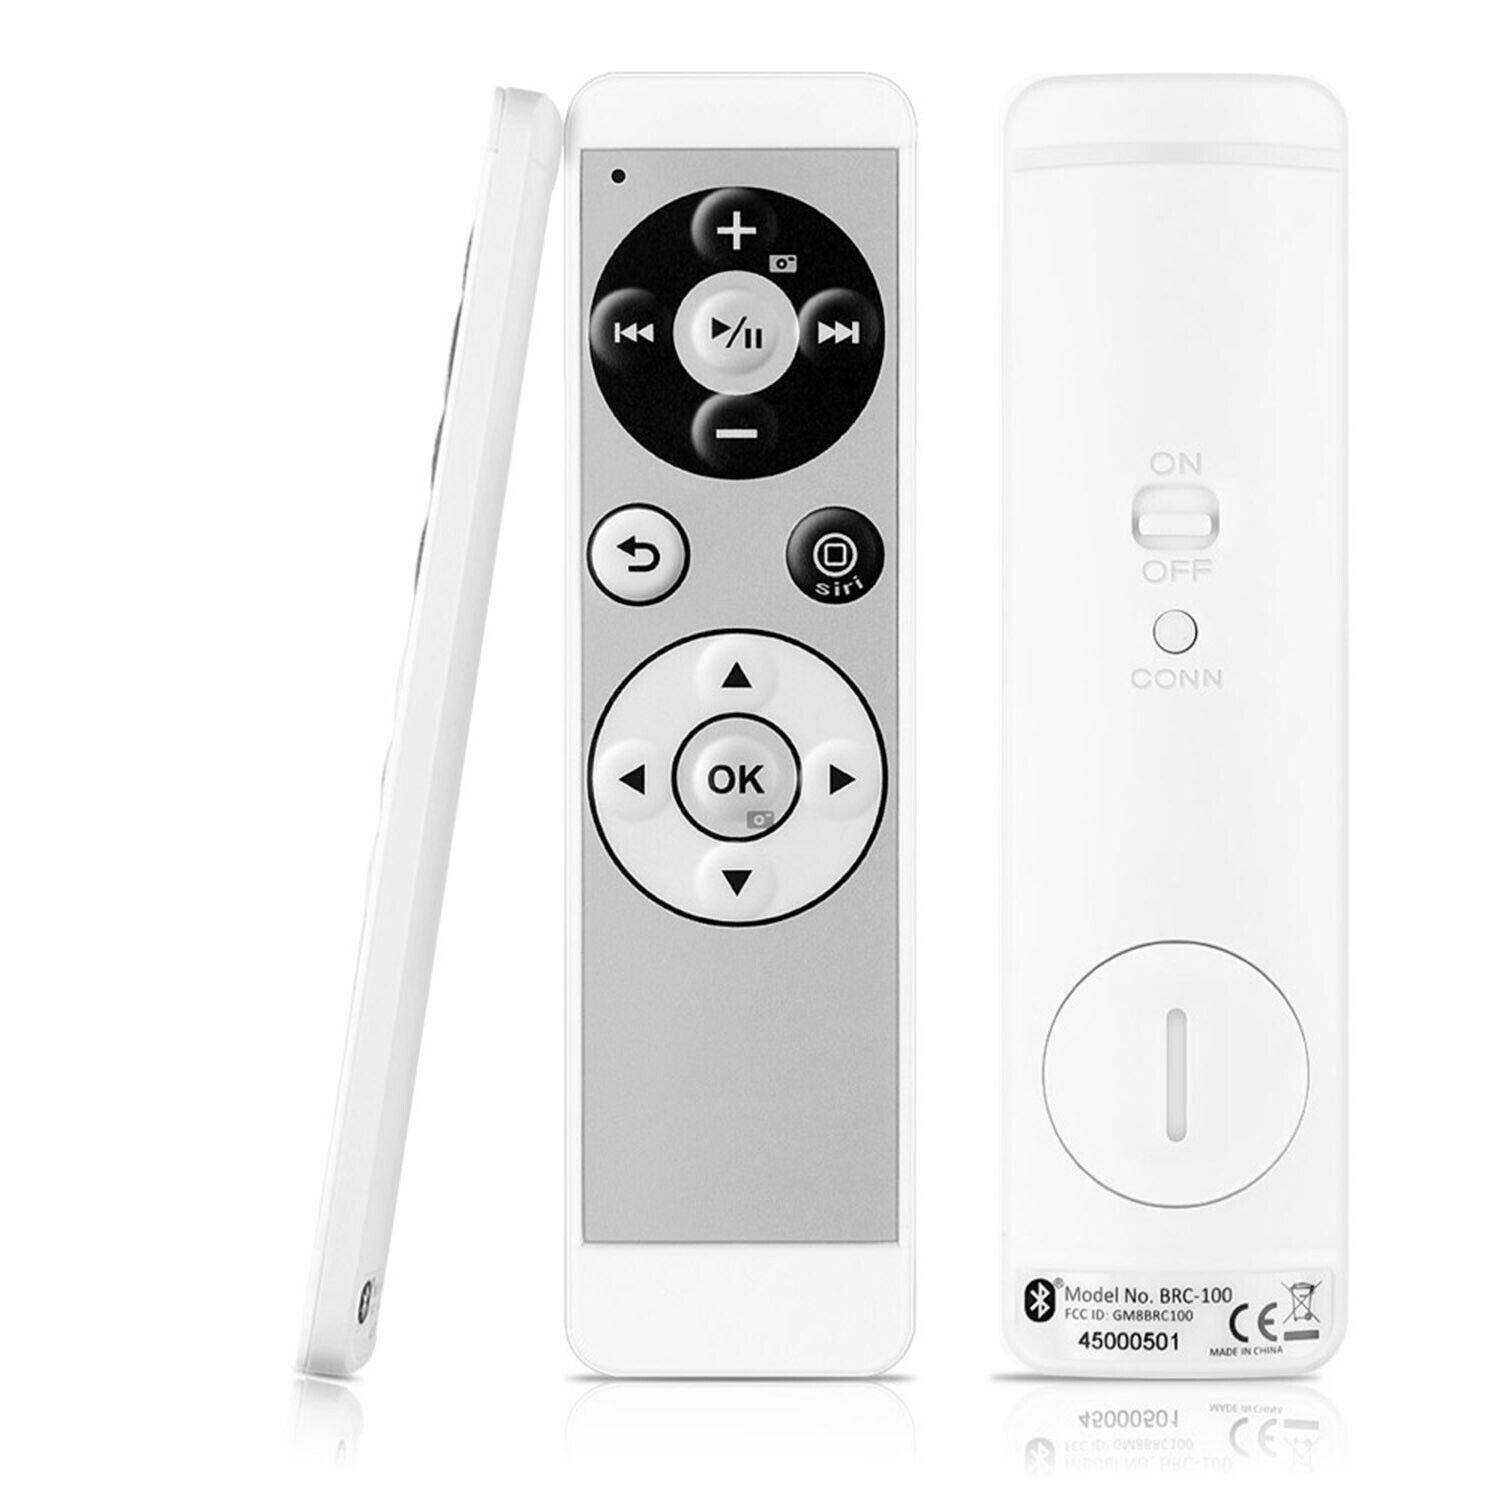 Bluetooth Remote Control For Apple iOS & Android Smartphone Tablet PC Laptop